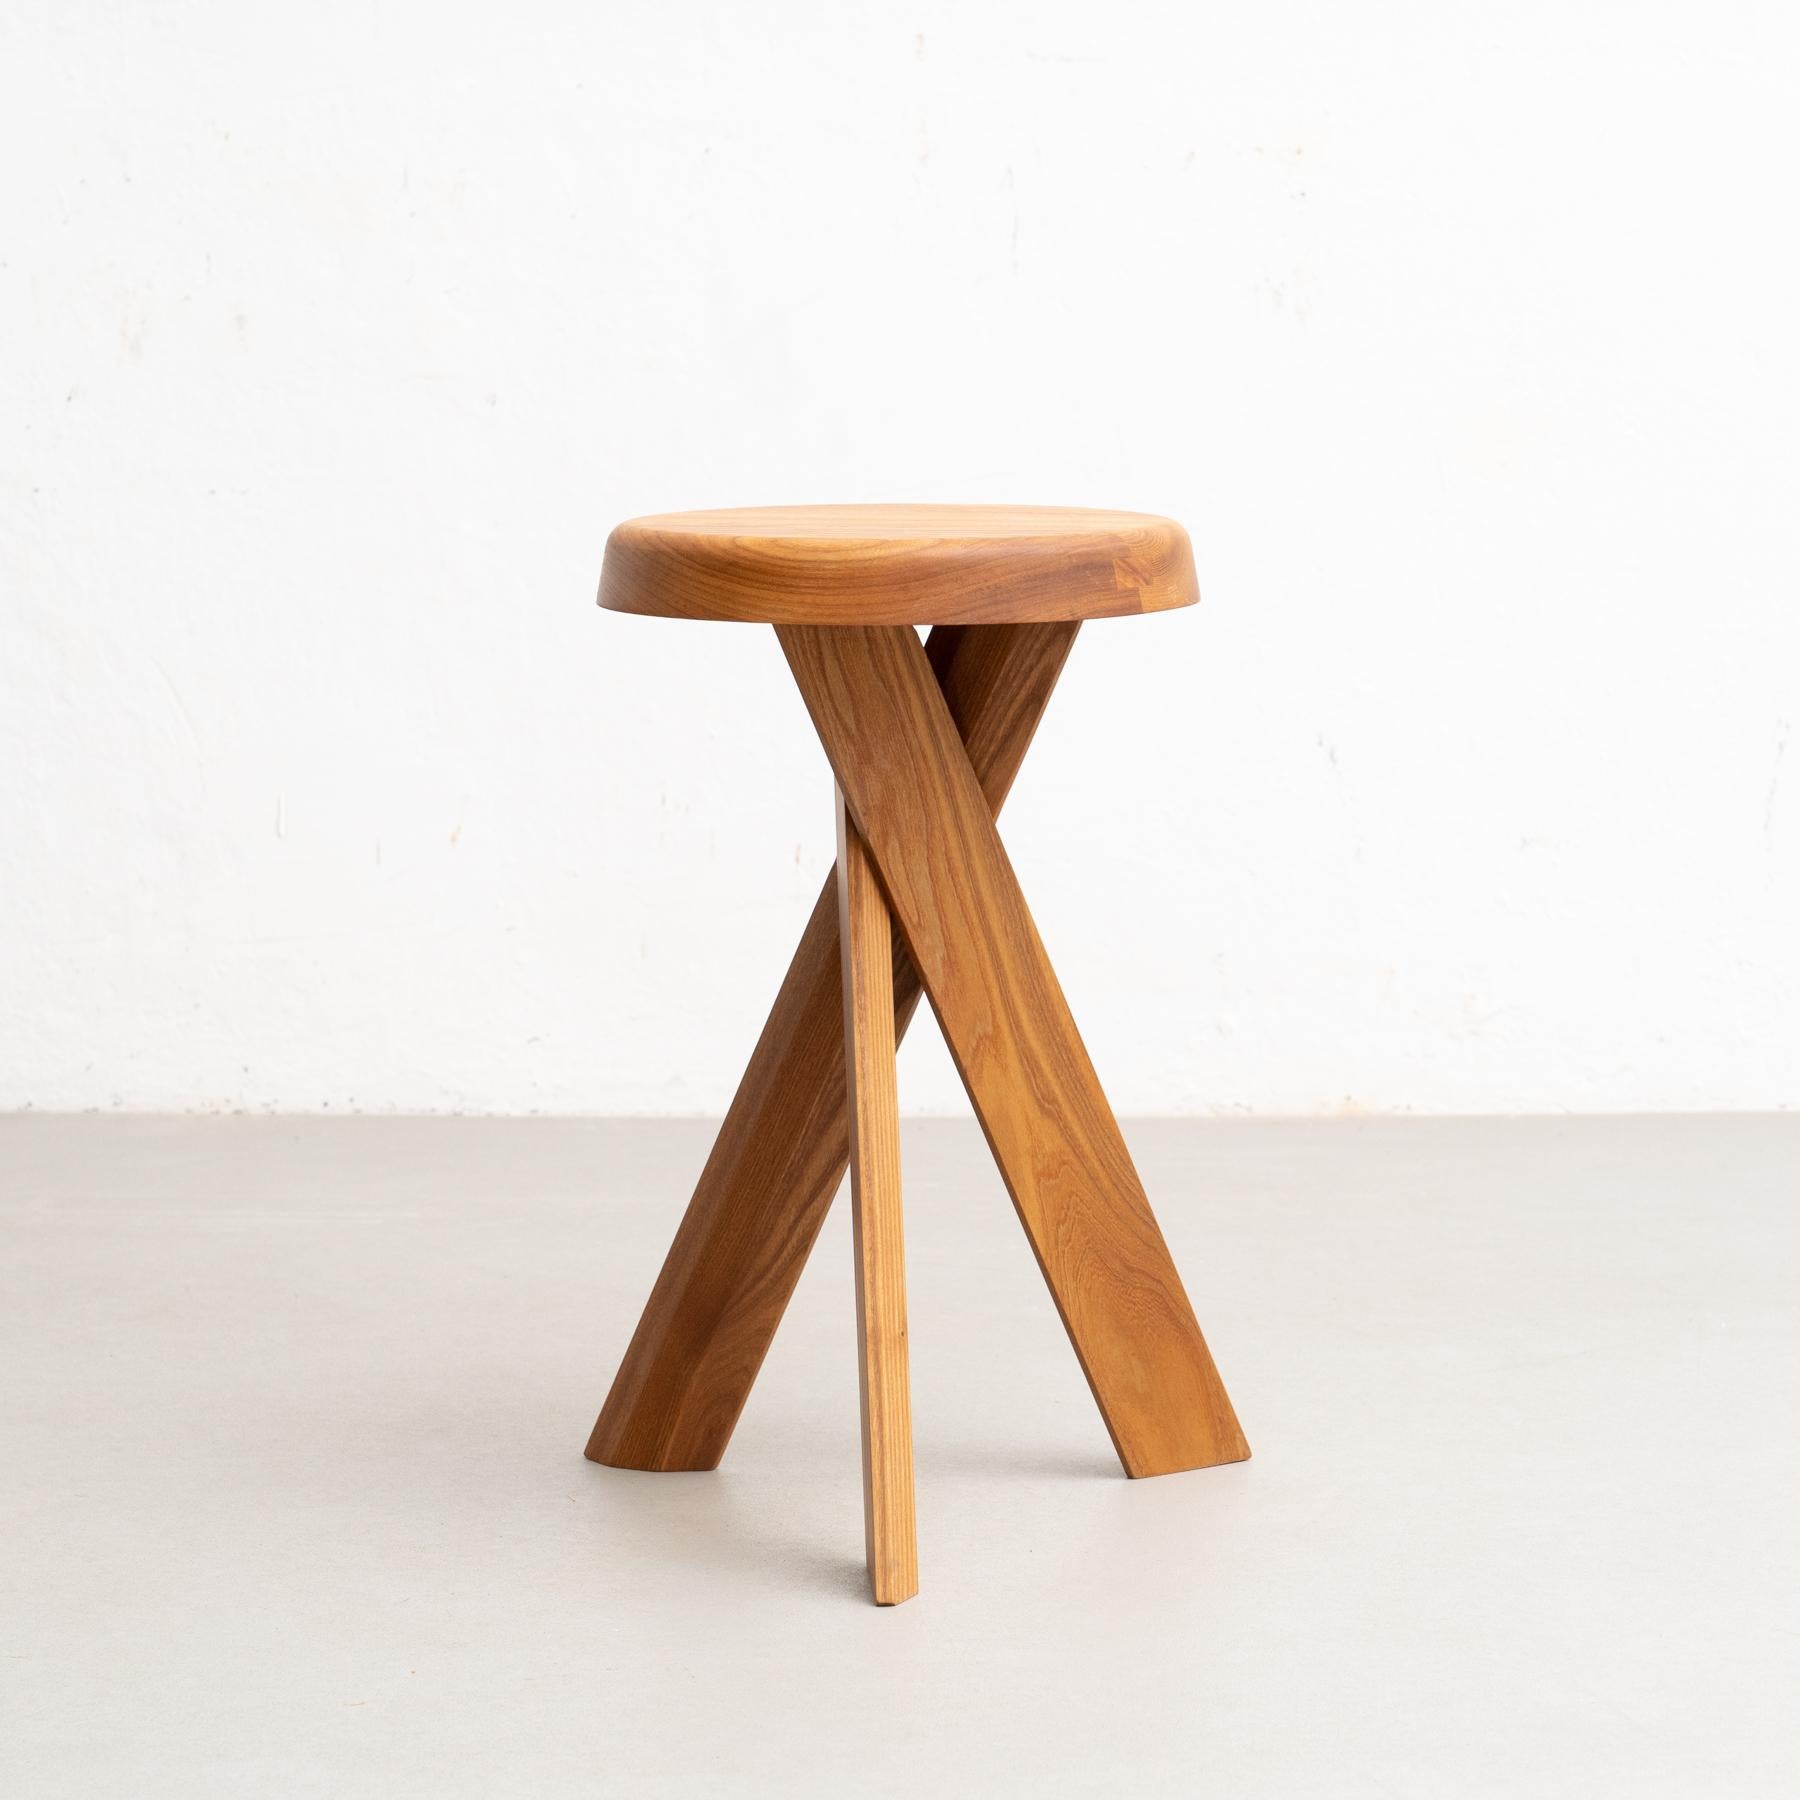 S 31 A stool designed by Pierre Chapo, circa 1960.

Manufactured by Chapo Creation in France, 2020.

Stamped solid elmwood.

In good original condition, with minor wear consistent with age and use, preserving a beautiful patina.

Pierre